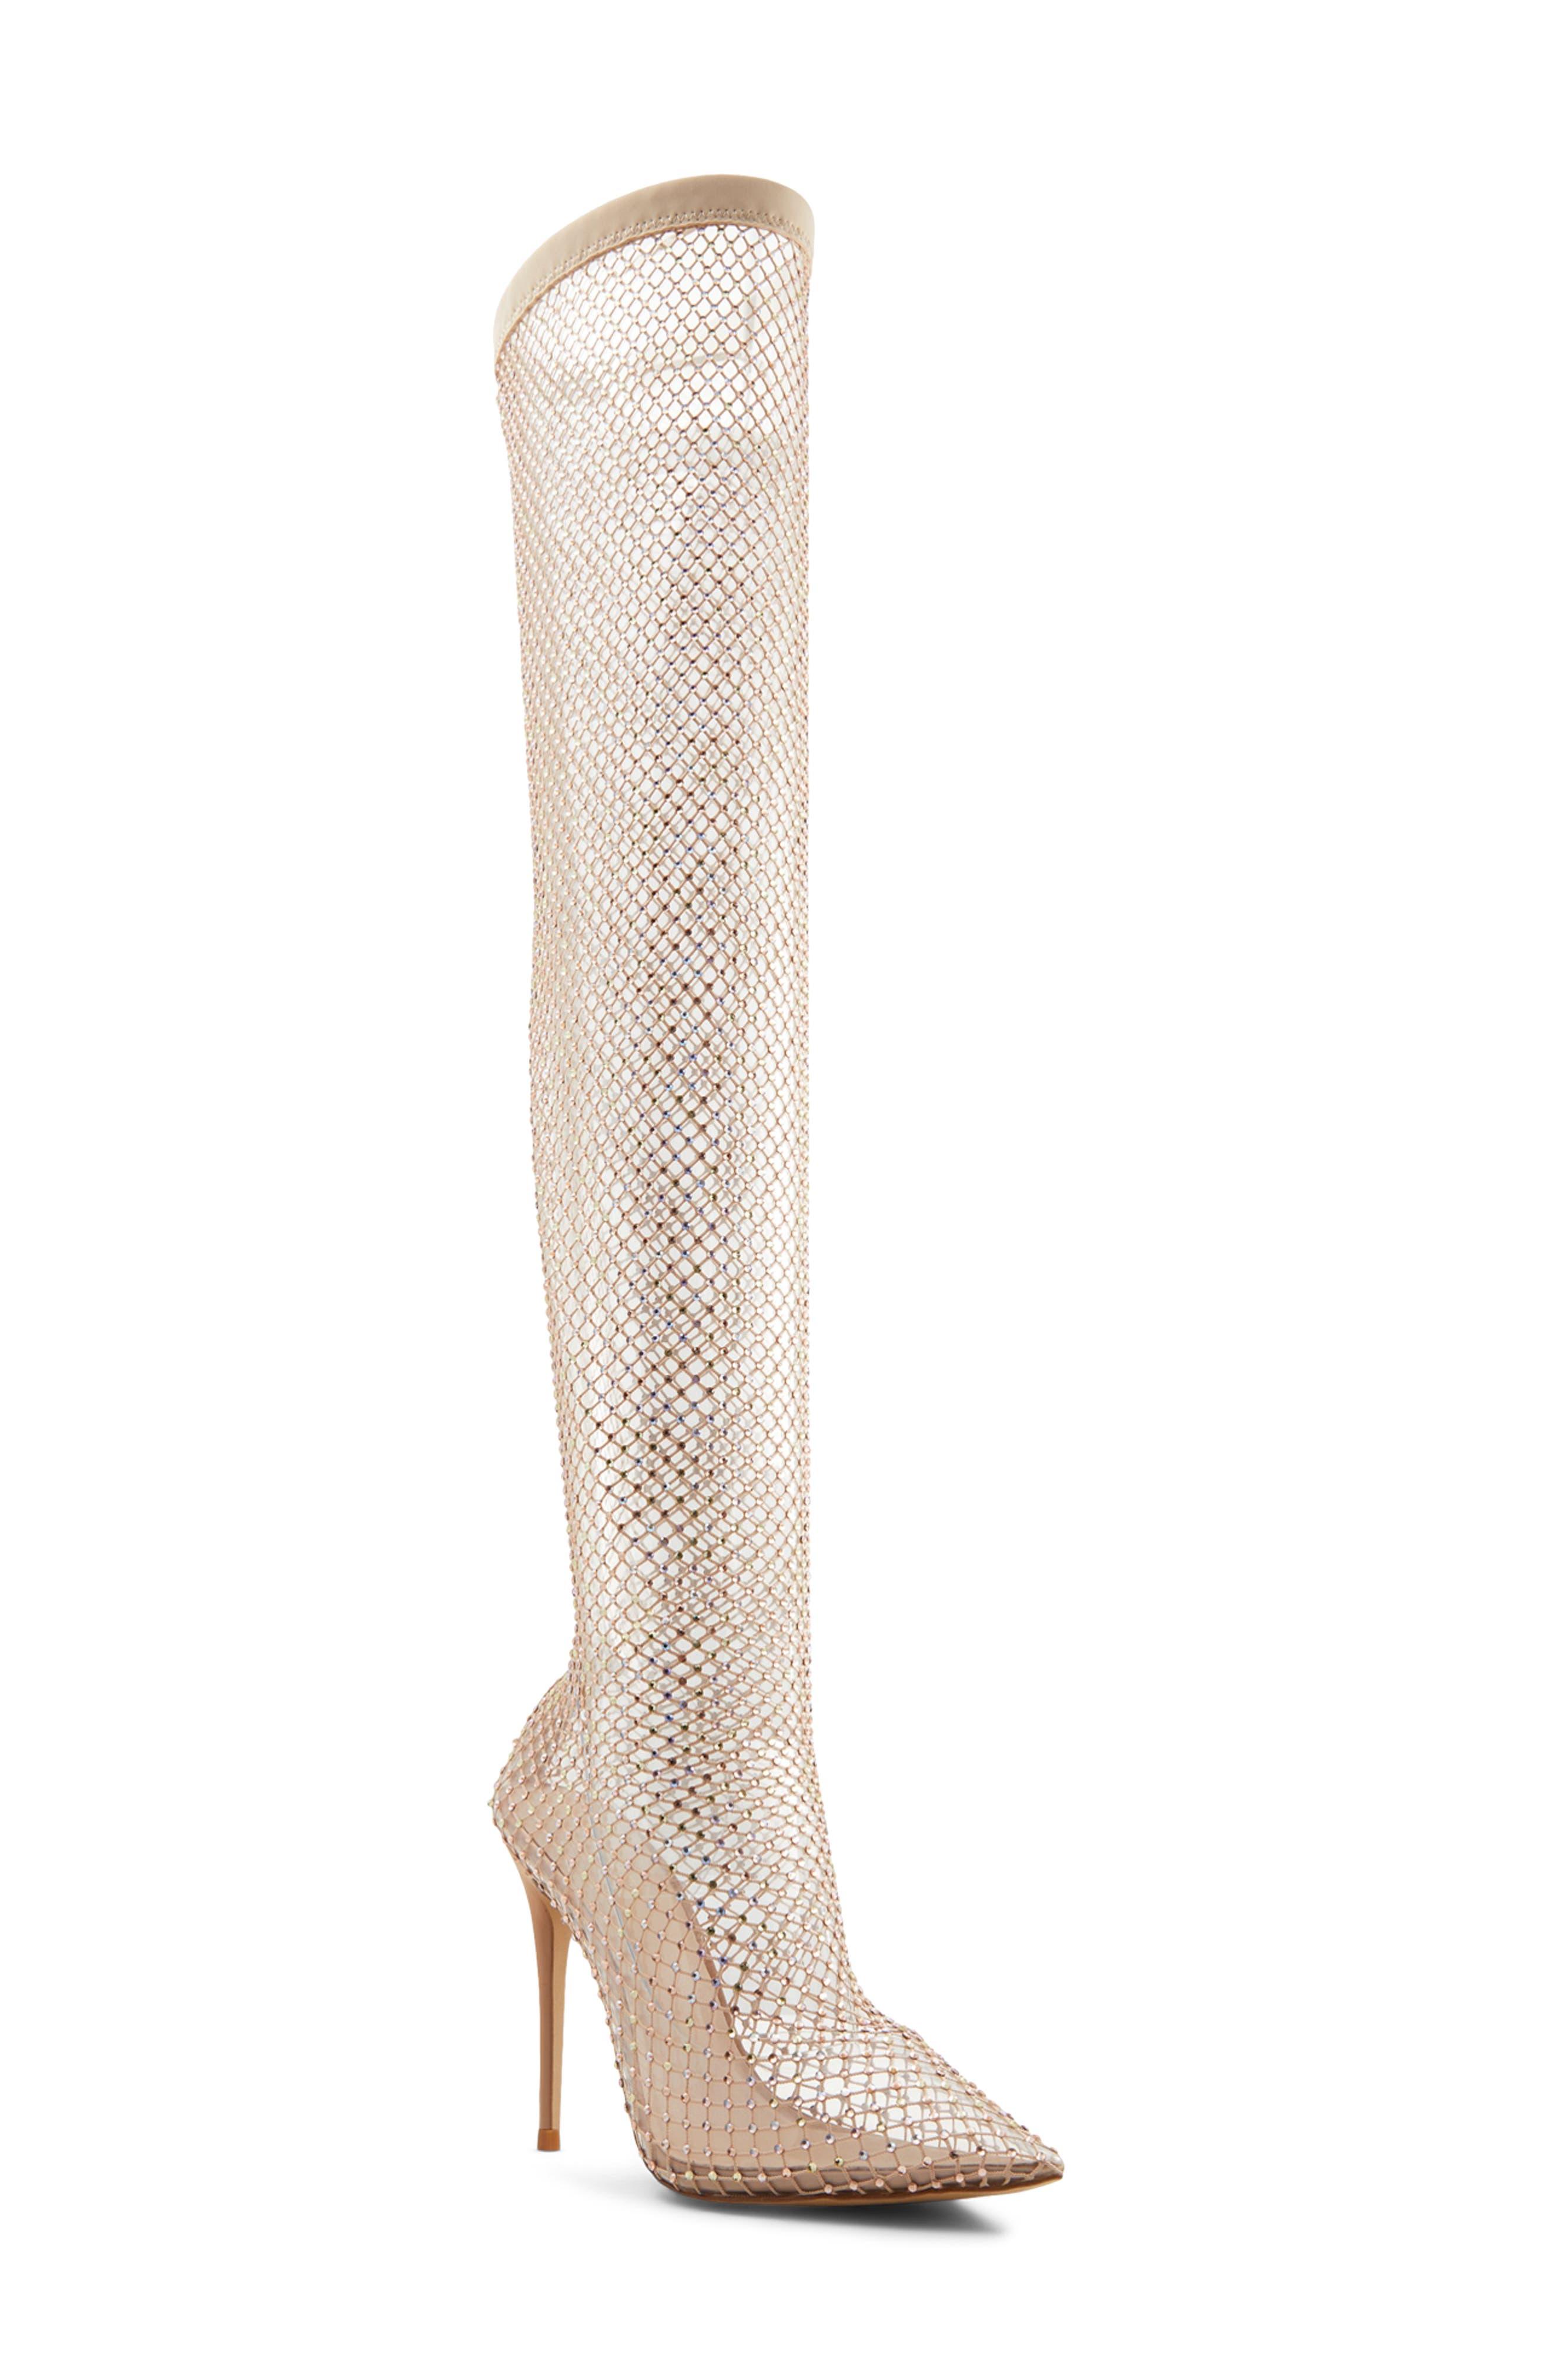 ALDO Arturi Over The Knee Pointed Toe Boot in White | Lyst